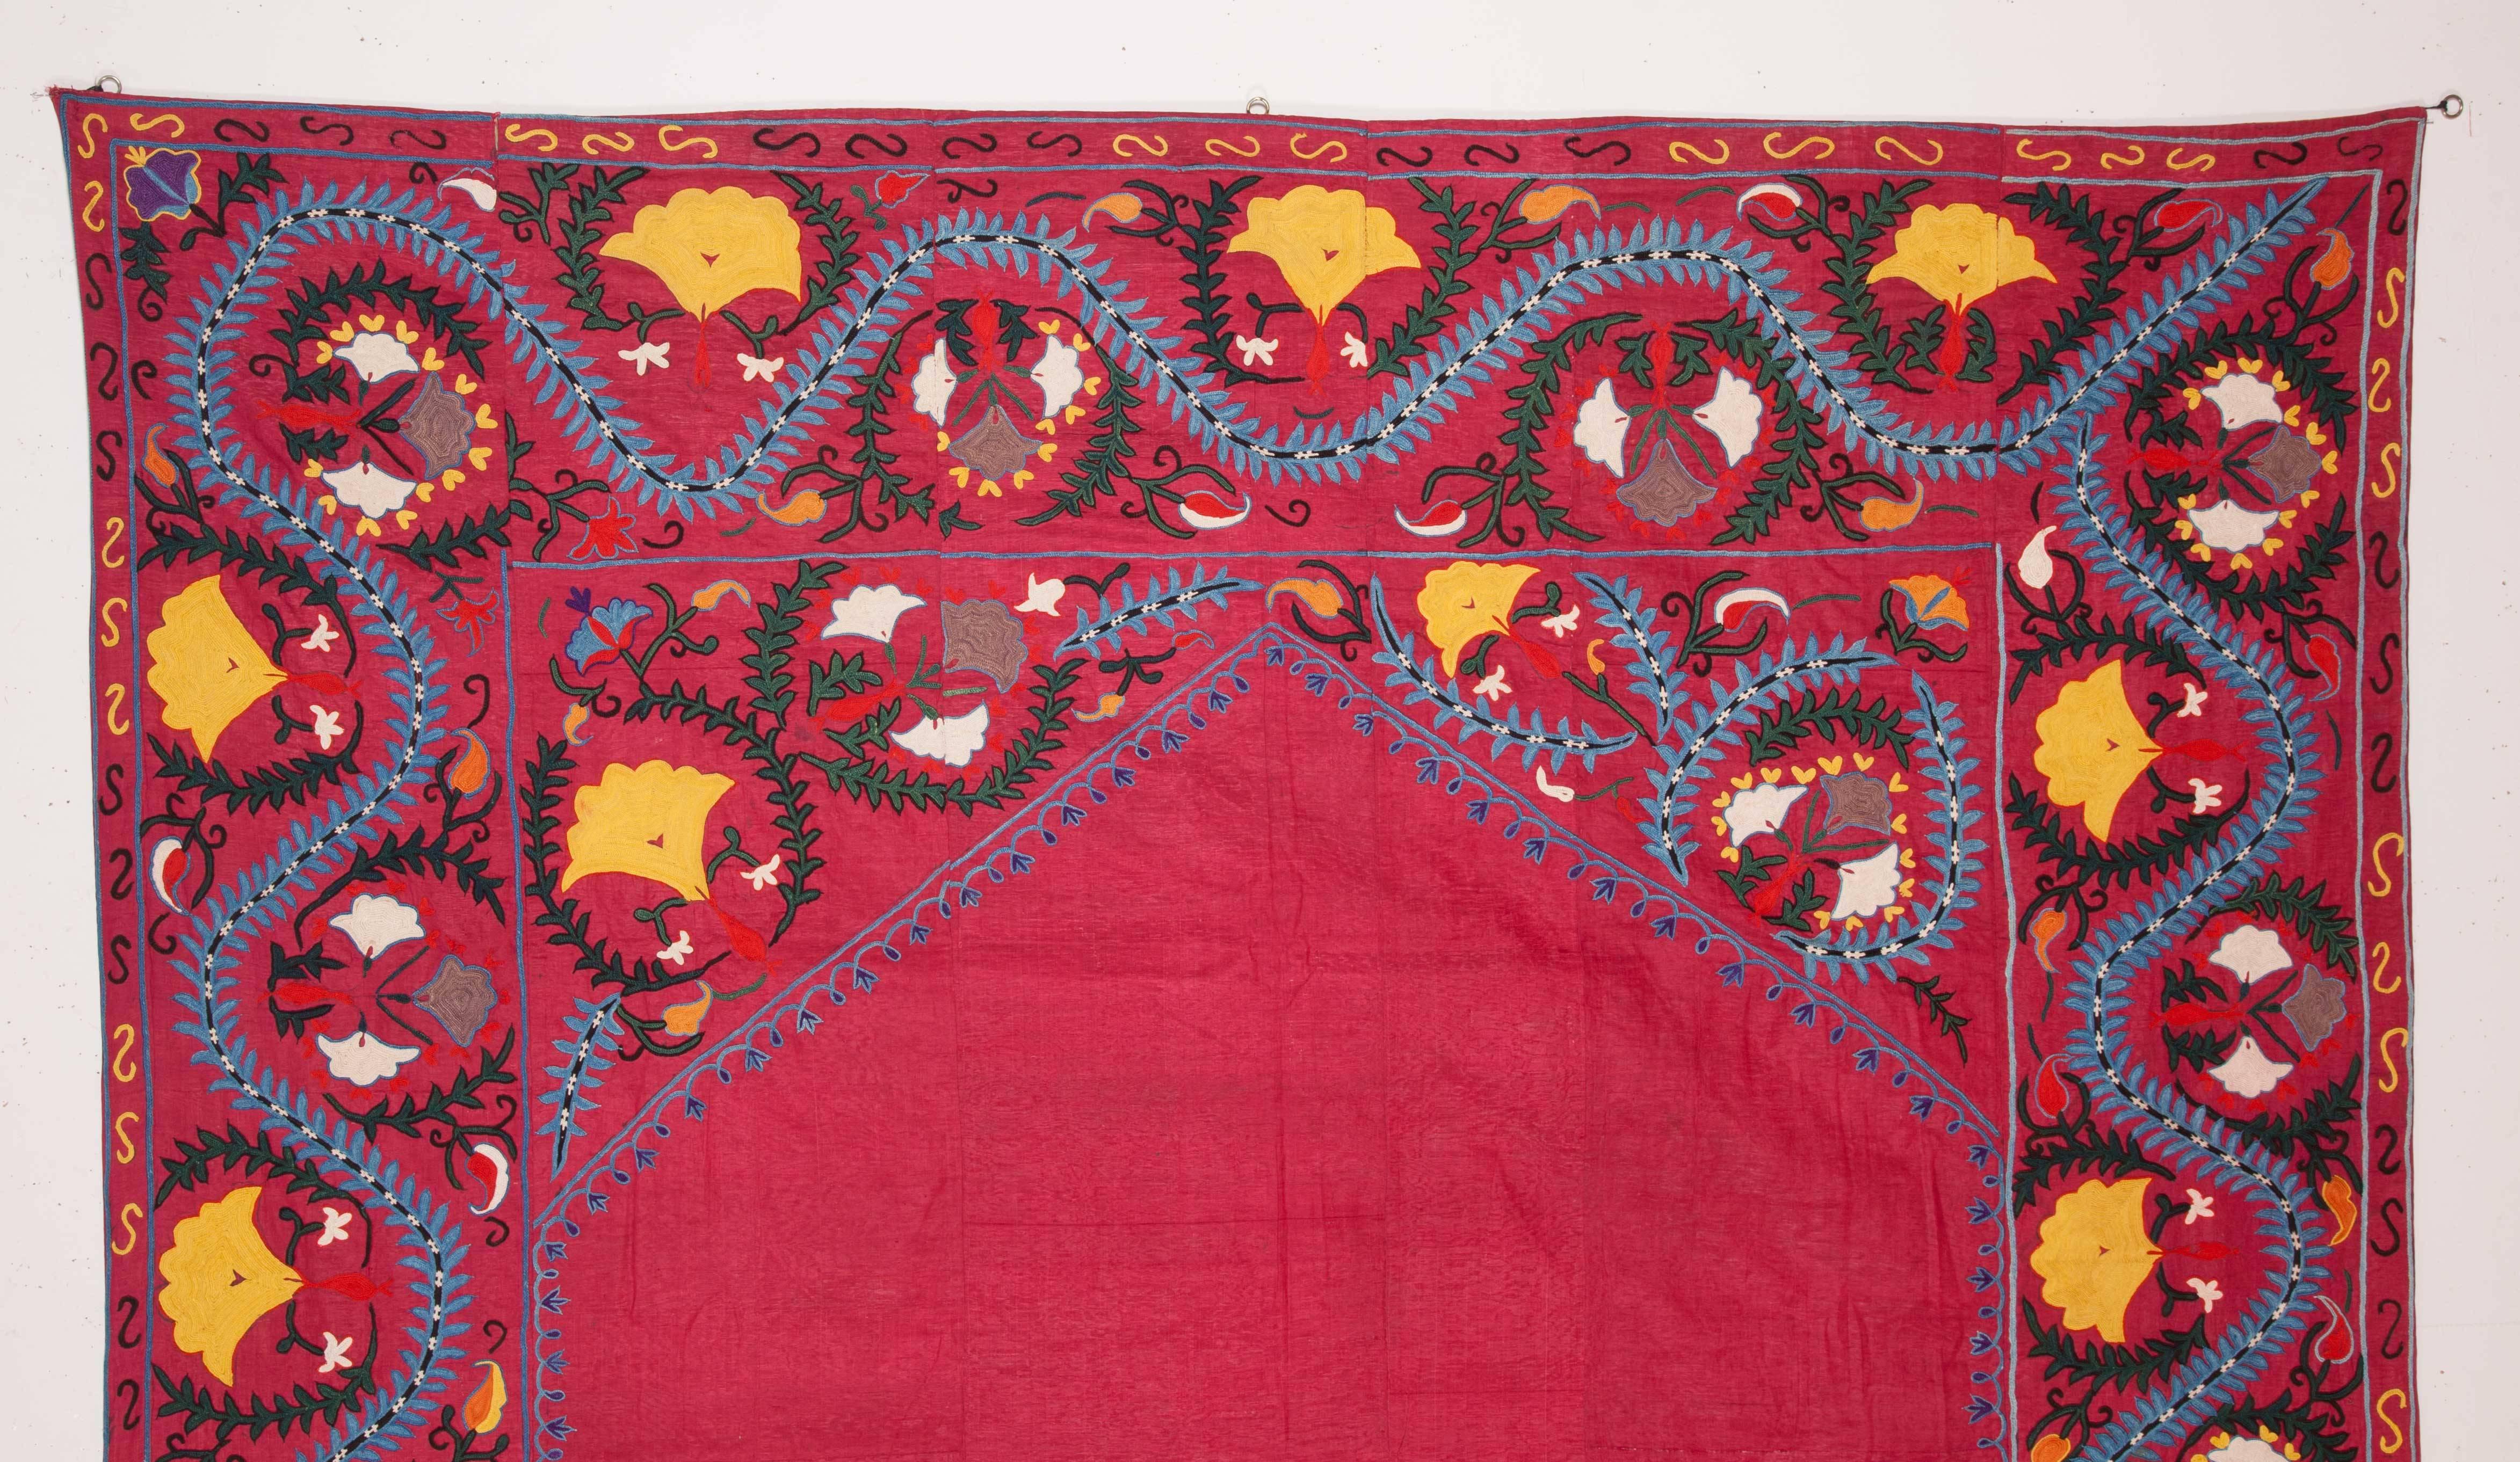 19th century antique Uzbek Shakrisabz Suzani with a Russian cotton print lining. A great one in very good condition.